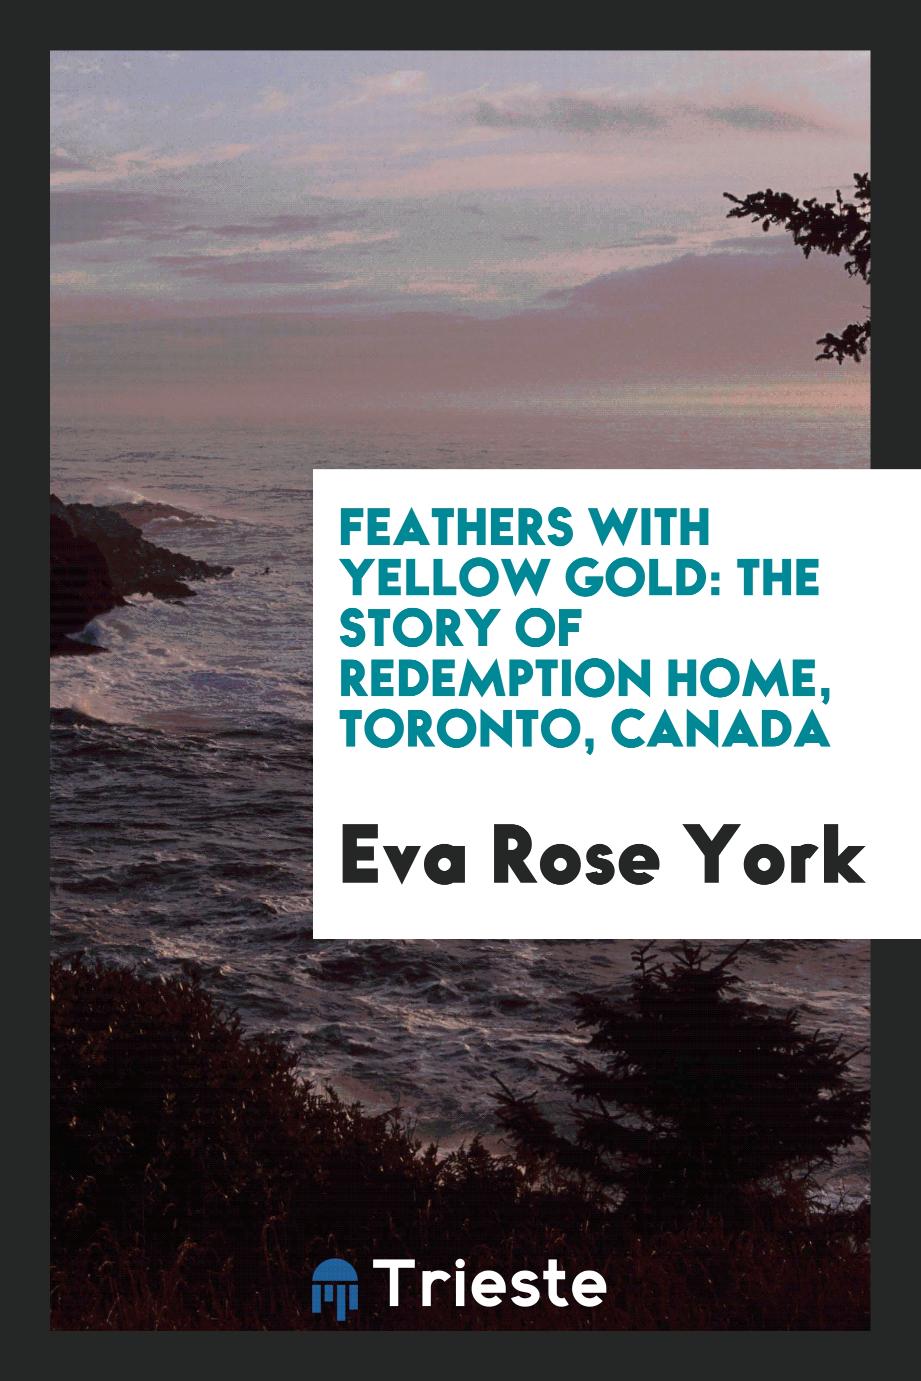 Feathers with yellow gold: the story of Redemption Home, Toronto, Canada